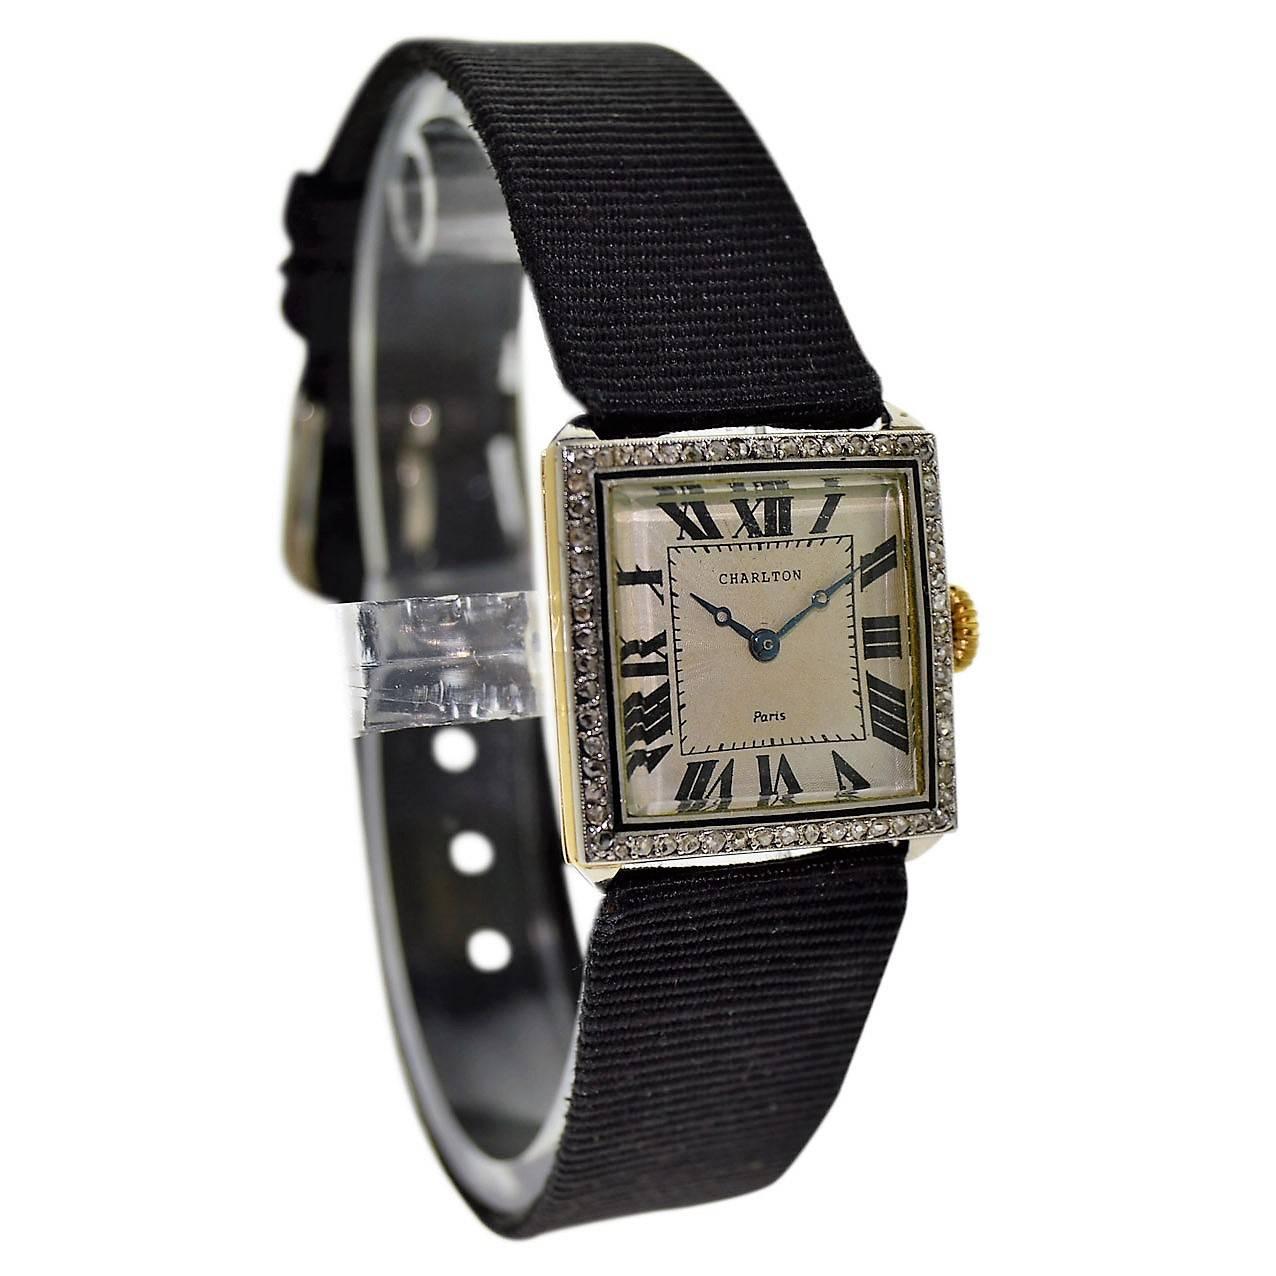 FACTORY / HOUSE: Charlton & Company / Paris
STYLE / REFERENCE: Art Deco 
METAL / MATERIAL: Platinum Top with Diamond Bezel / Gold Case
CIRCA: 1920's
DIMENSIONS: 24mm X 21mm
MOVEMENT / CALIBER: Manual Winding / 18 Jewels / French High Grade
DIAL /